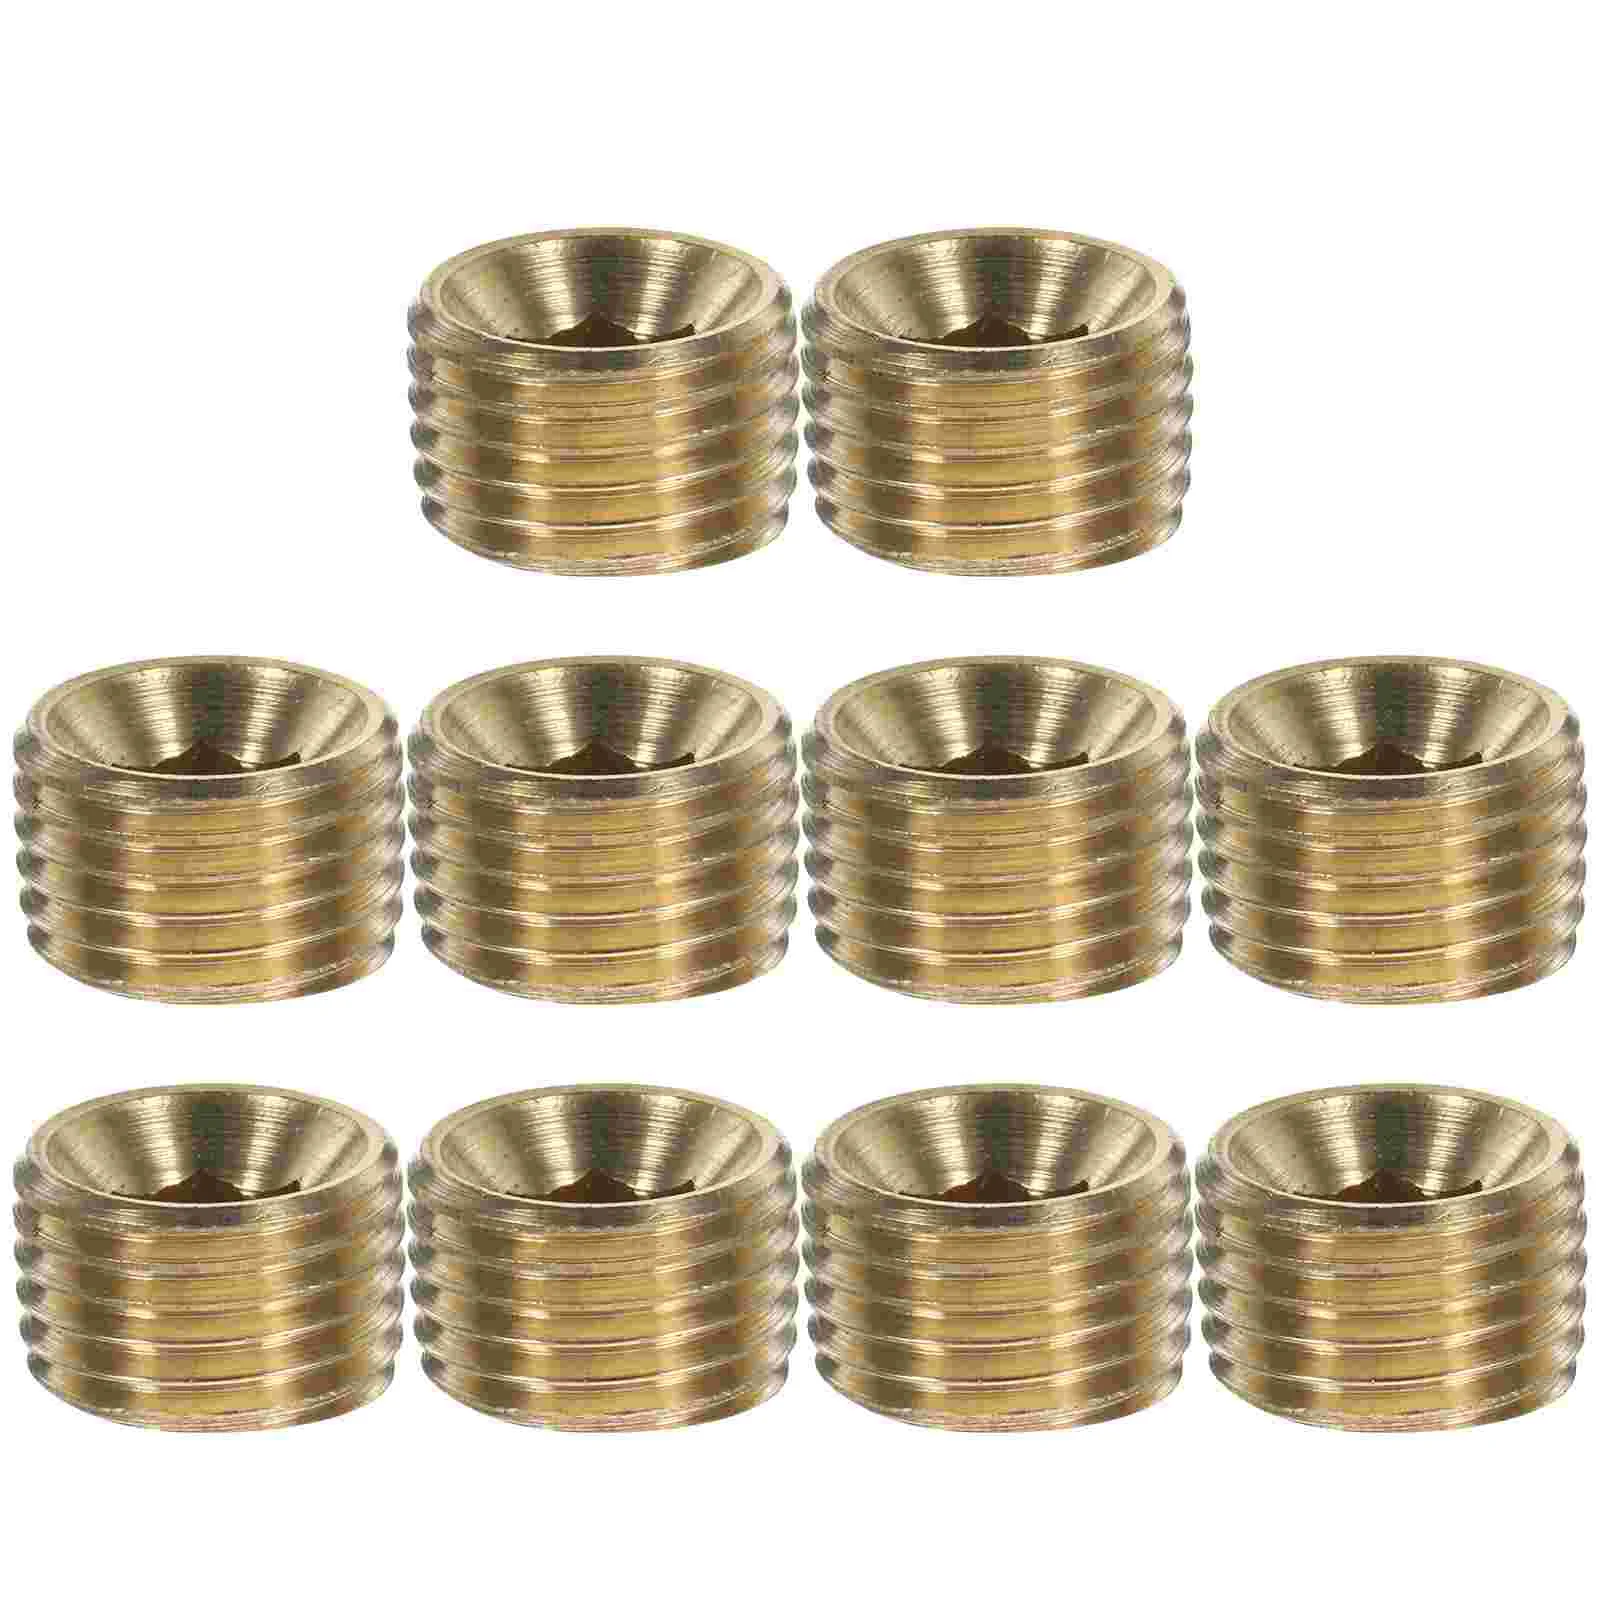 

10 Pcs An Fittings Hexagonal Tubing Connector Copper Plug 1/4 Npt Water Pipe Plugs Brass Coupling Hose End Cap Sprinkler Caps